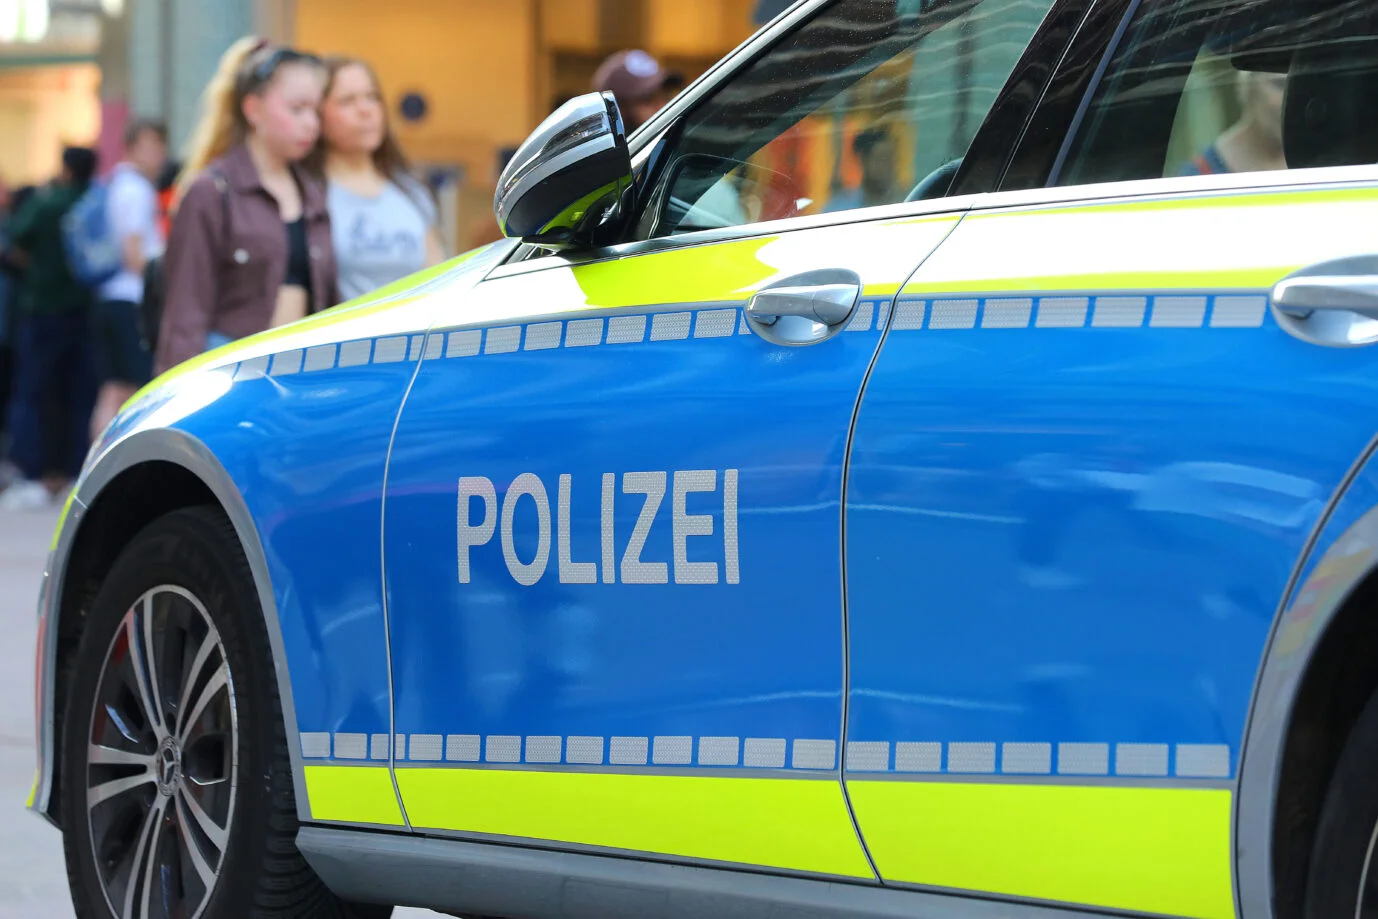 Knife attack by the assassin in Duisburg: A police vehicle in action (symbolic image)